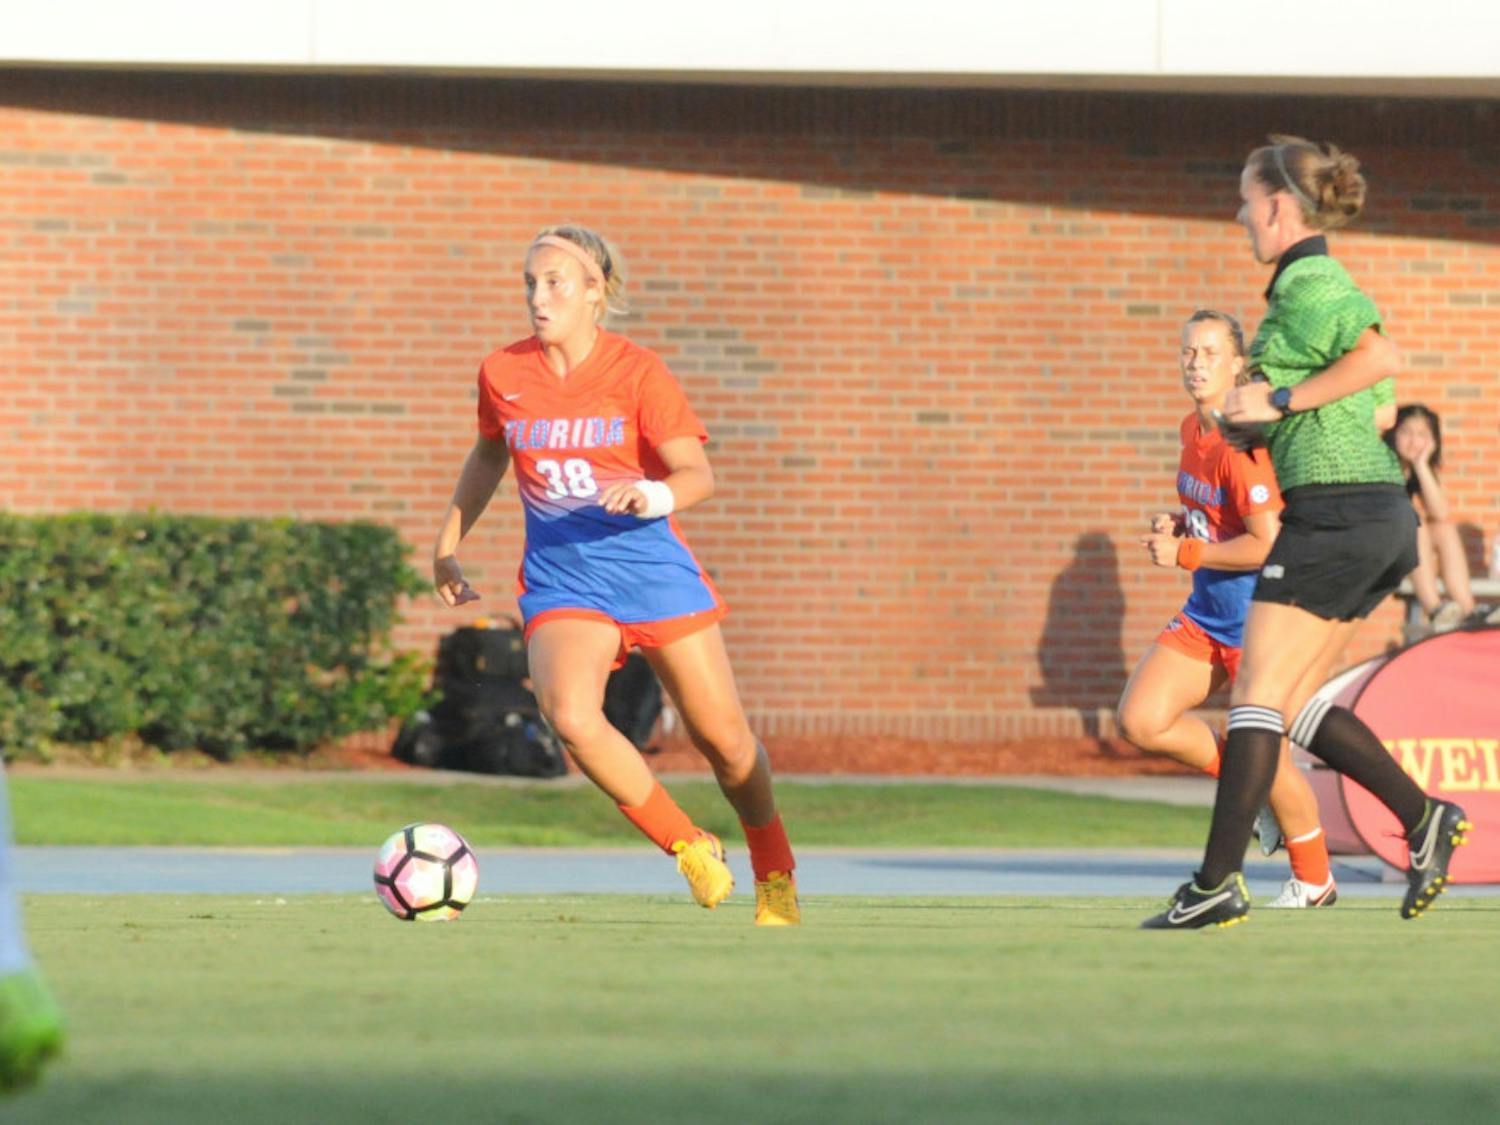 UF midfielder Gabby Seiler dribbles down the field during Florida's 5-2 win against Iowa State on Aug. 19, 2016, at James G. Pressly Stadium.